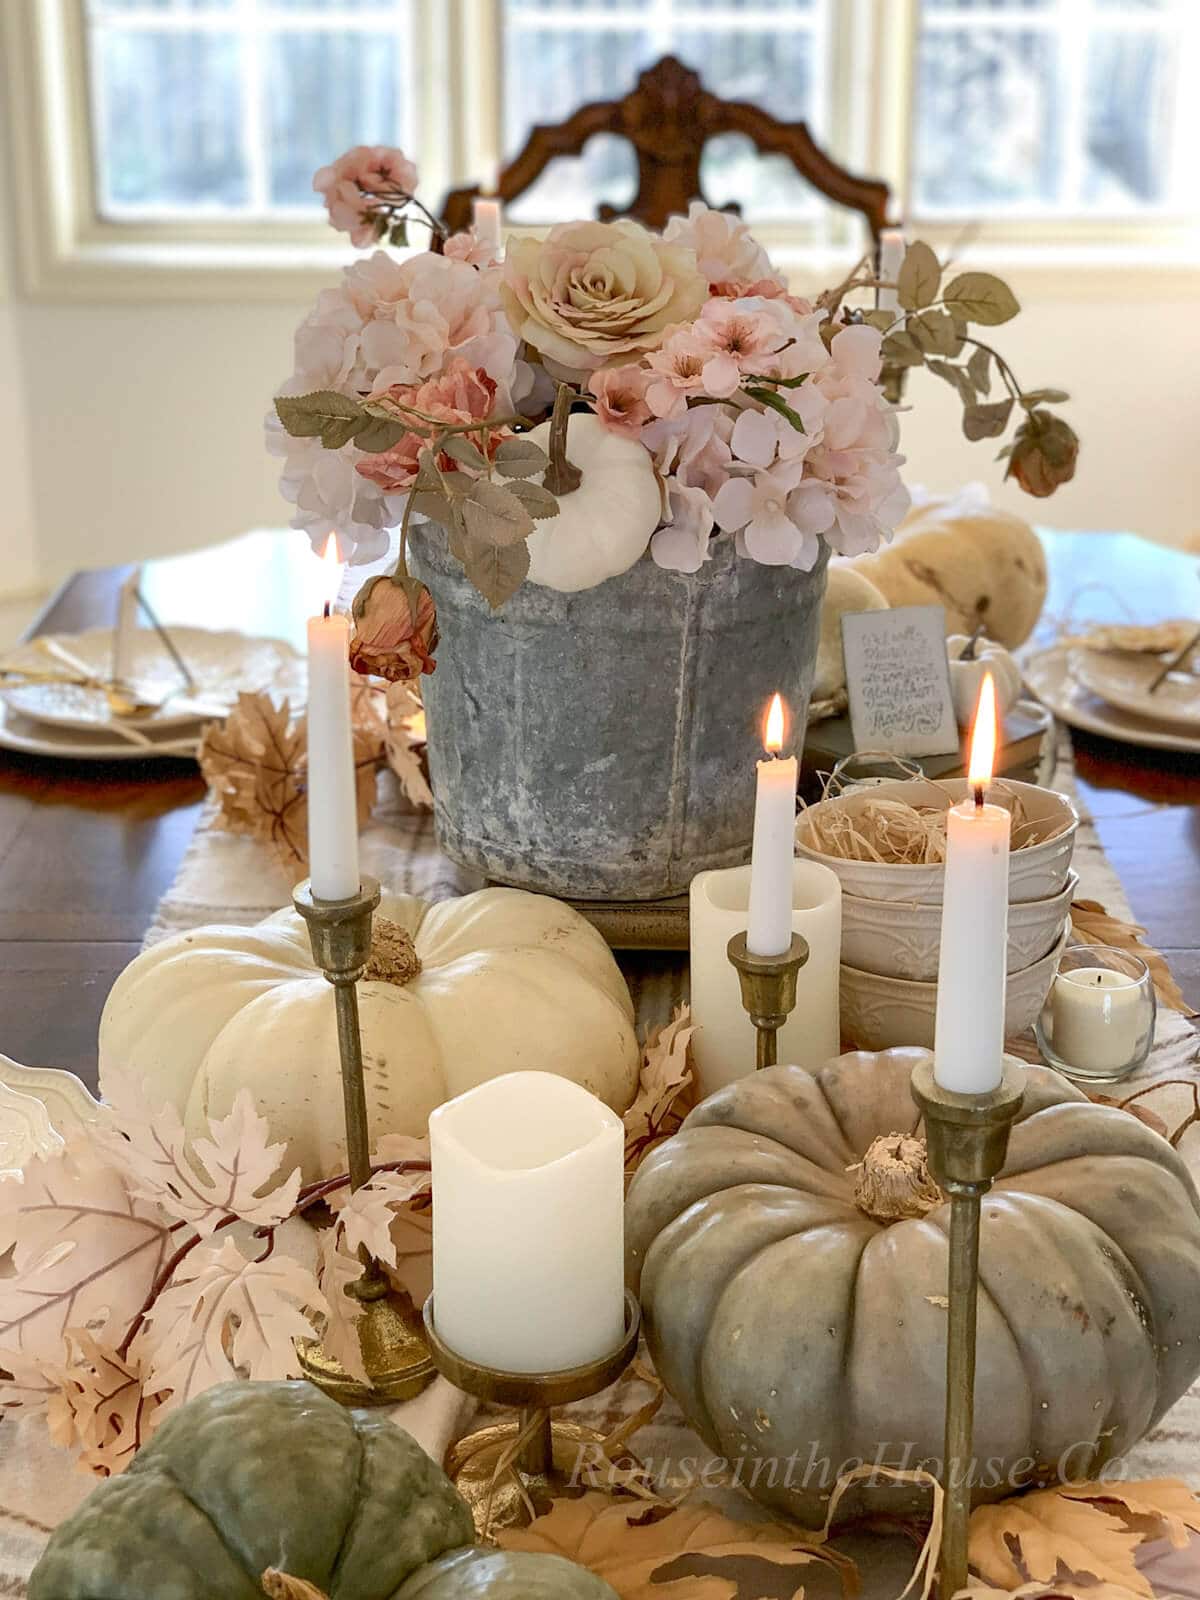 The center of a table decorated for Friendsgiving dinner.